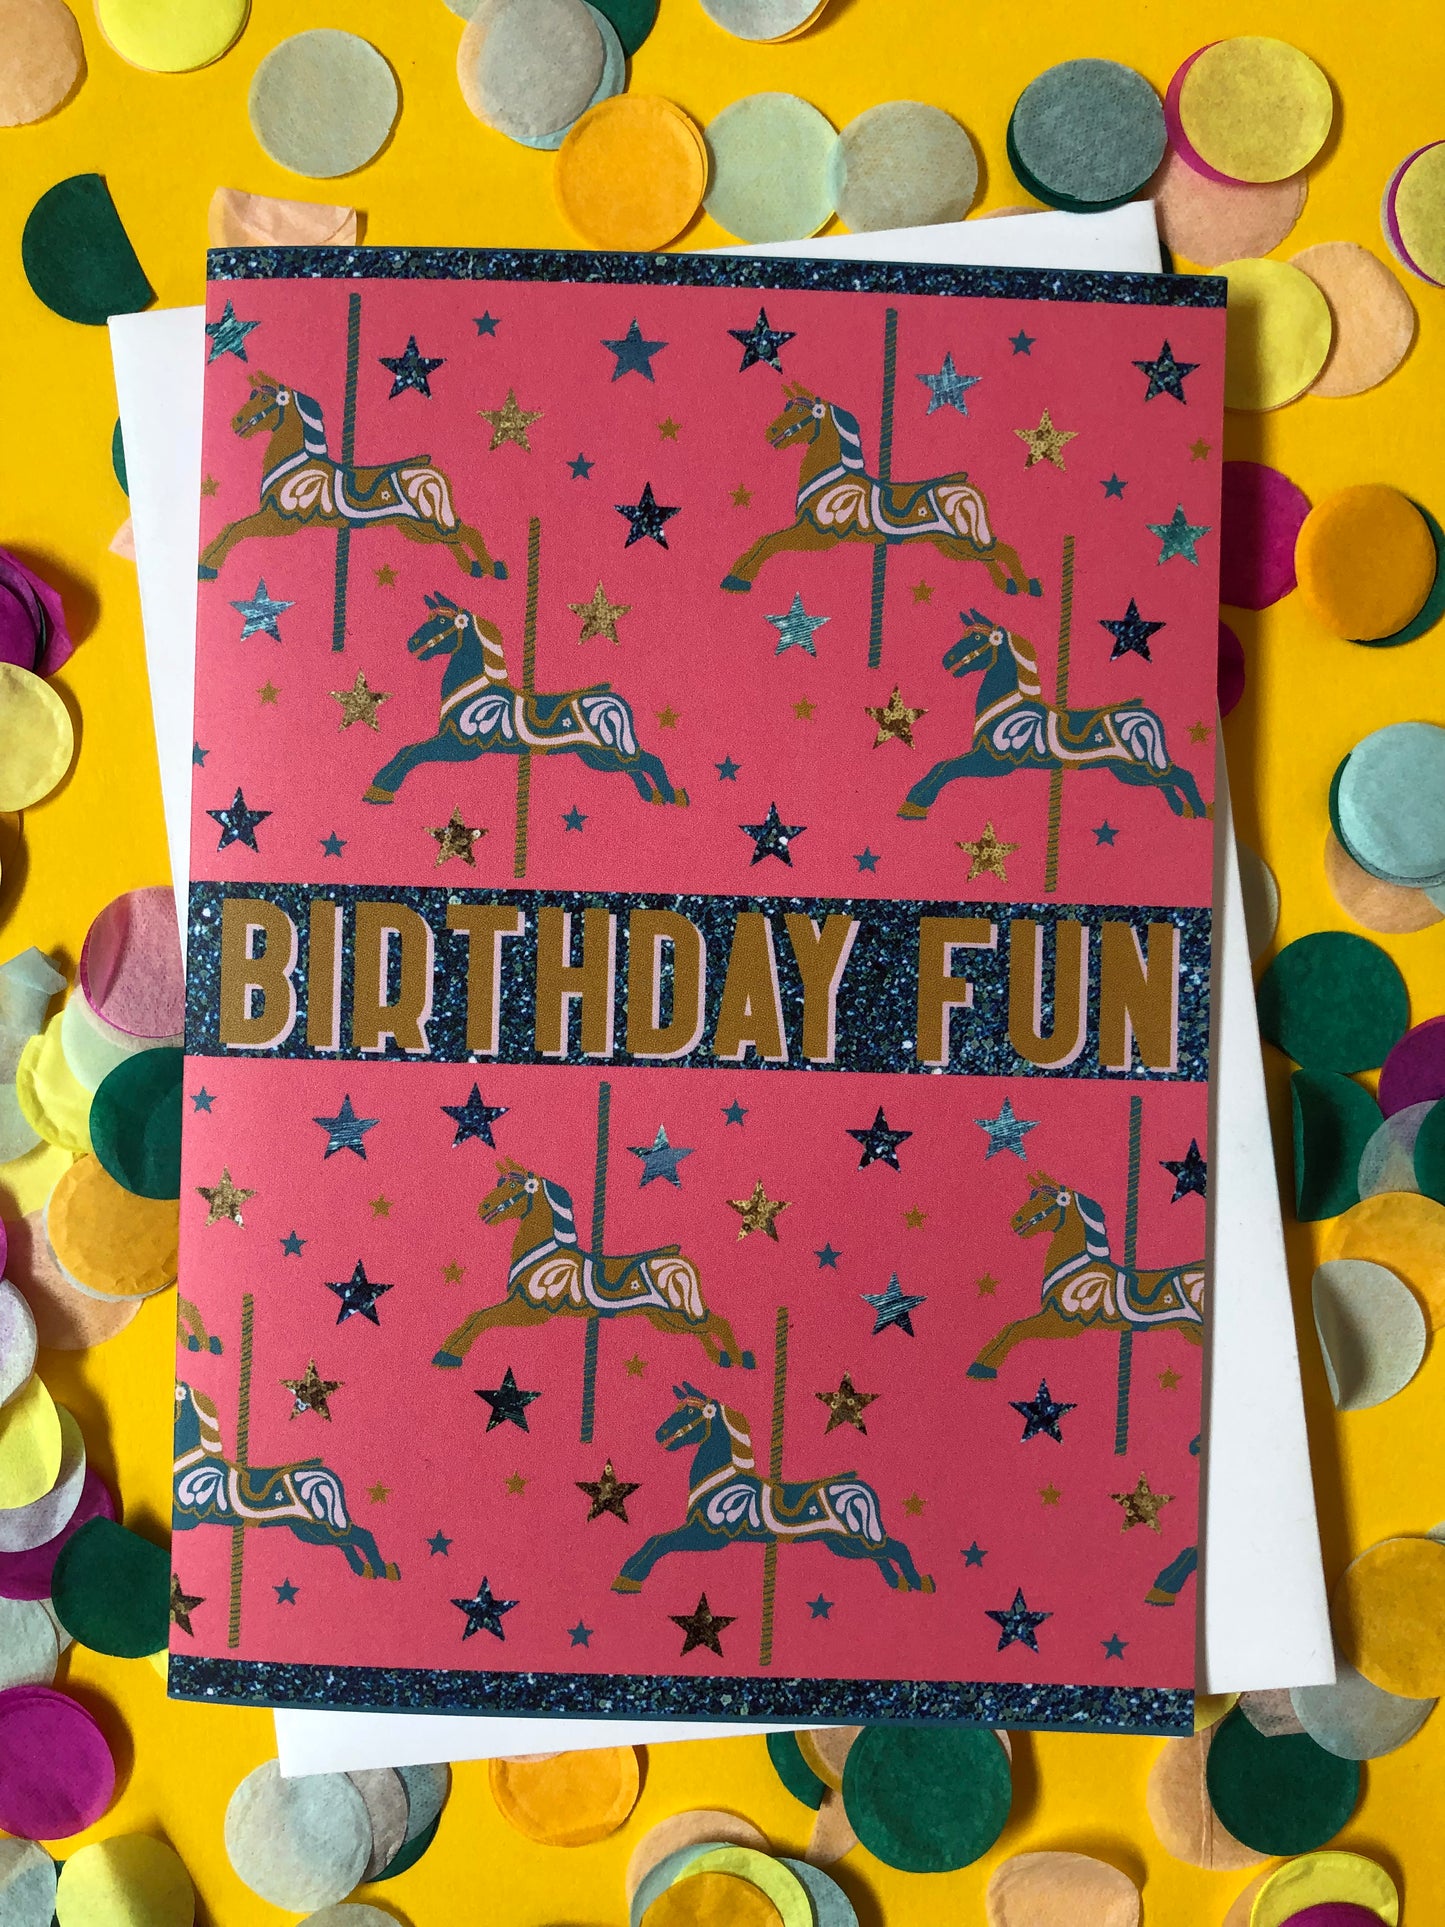 Bright and fun birthday card featuring a carousel horse design on a background of confetti